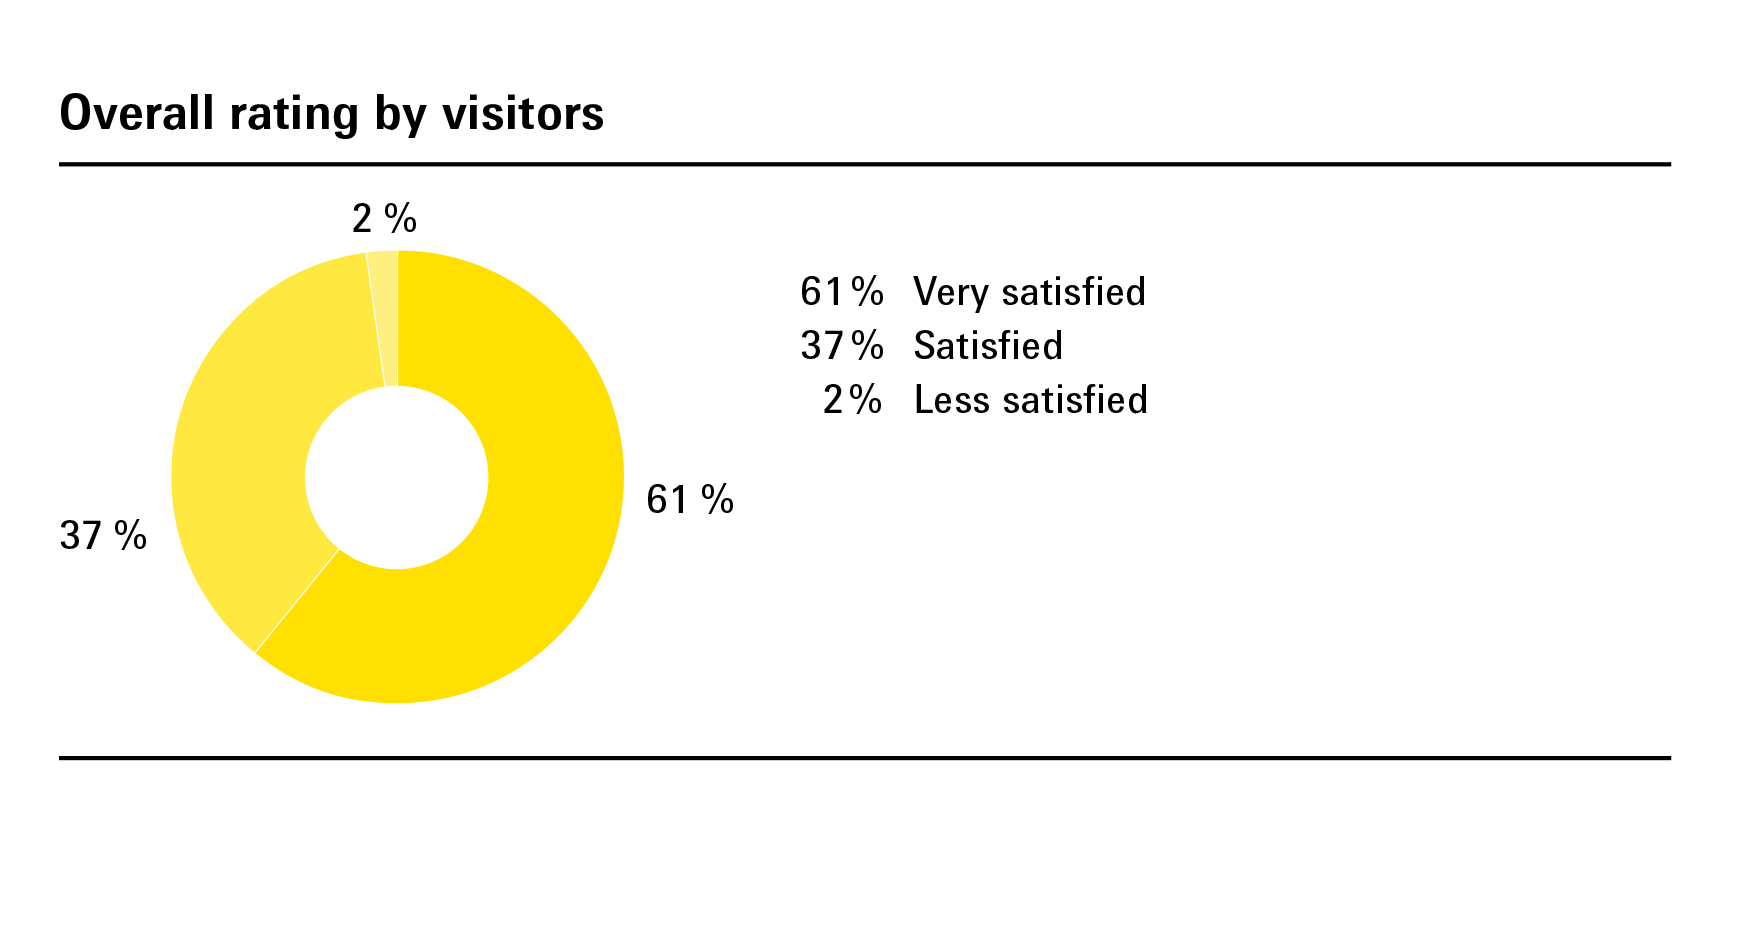 Overall rating by visitors